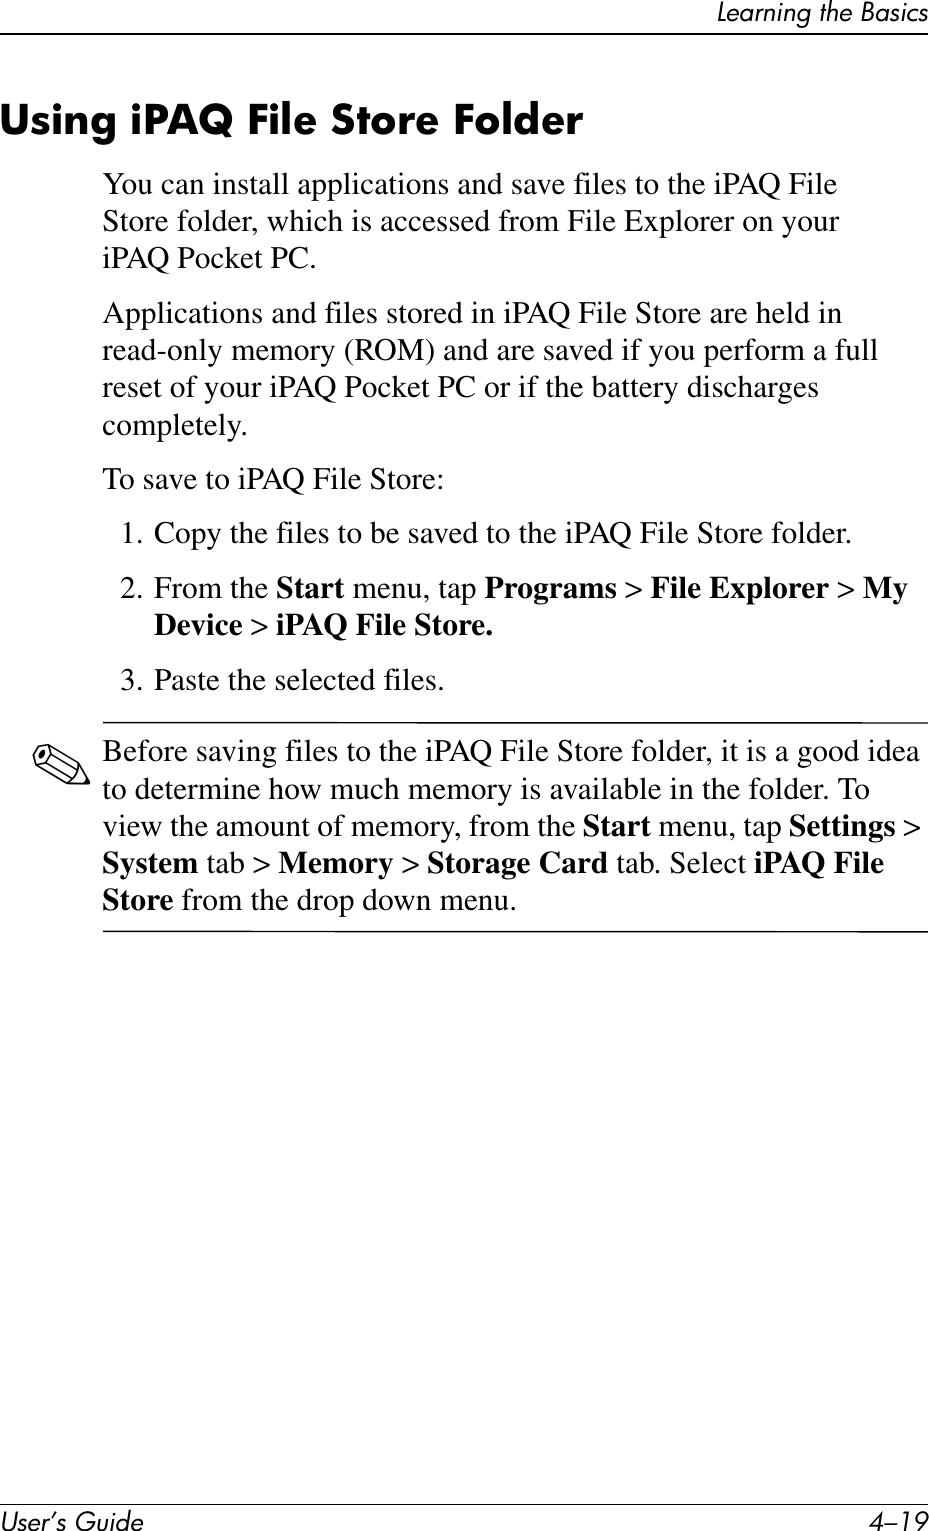 Learning the BasicsUser’s Guide 4–19Using iPAQ File Store FolderYou can install applications and save files to the iPAQ File Store folder, which is accessed from File Explorer on your iPAQ Pocket PC.Applications and files stored in iPAQ File Store are held in read-only memory (ROM) and are saved if you perform a full reset of your iPAQ Pocket PC or if the battery discharges completely.To save to iPAQ File Store:1. Copy the files to be saved to the iPAQ File Store folder.2. From the Start menu, tap Programs &gt; File Explorer &gt; My Device &gt; iPAQ File Store.3. Paste the selected files.✎Before saving files to the iPAQ File Store folder, it is a good idea to determine how much memory is available in the folder. To view the amount of memory, from the Start menu, tap Settings &gt; System tab &gt; Memory &gt; Storage Card tab. Select iPAQ File Store from the drop down menu.